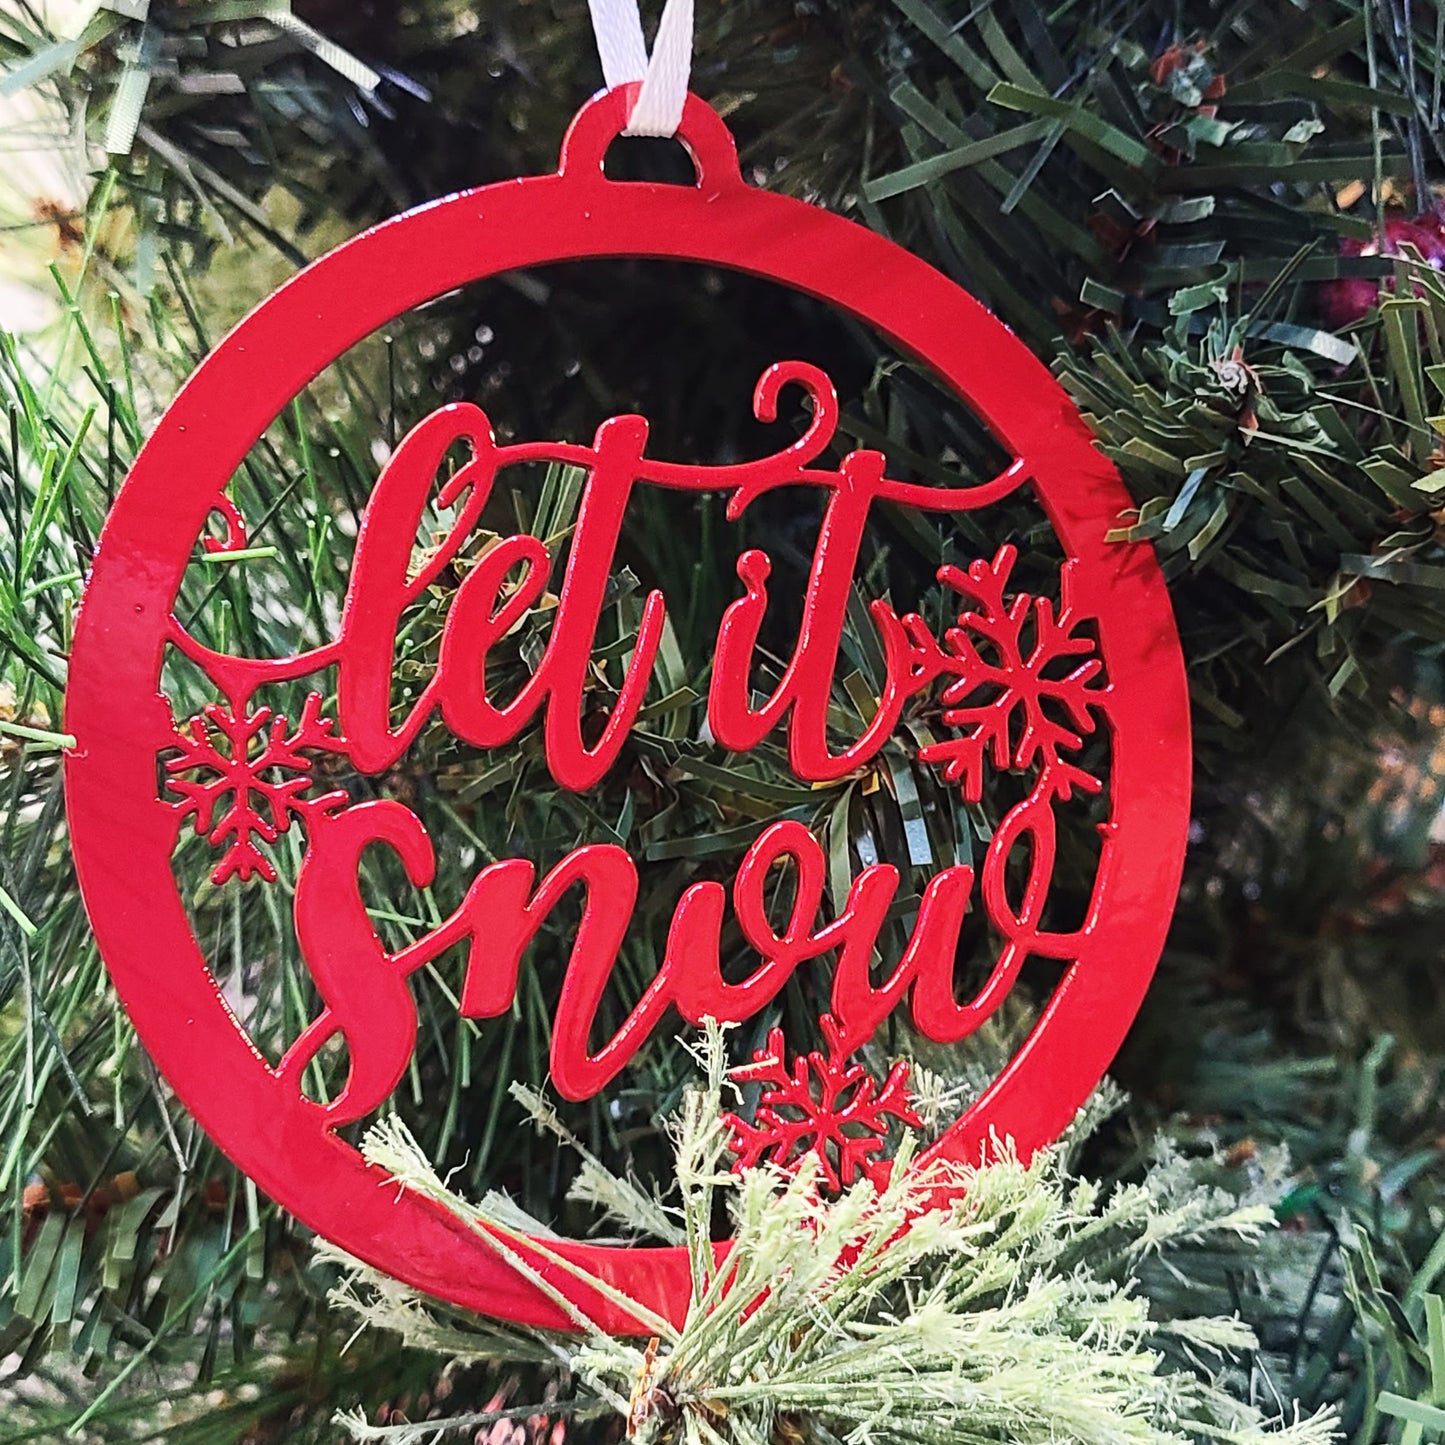 Let it Snow Holiday Ornament